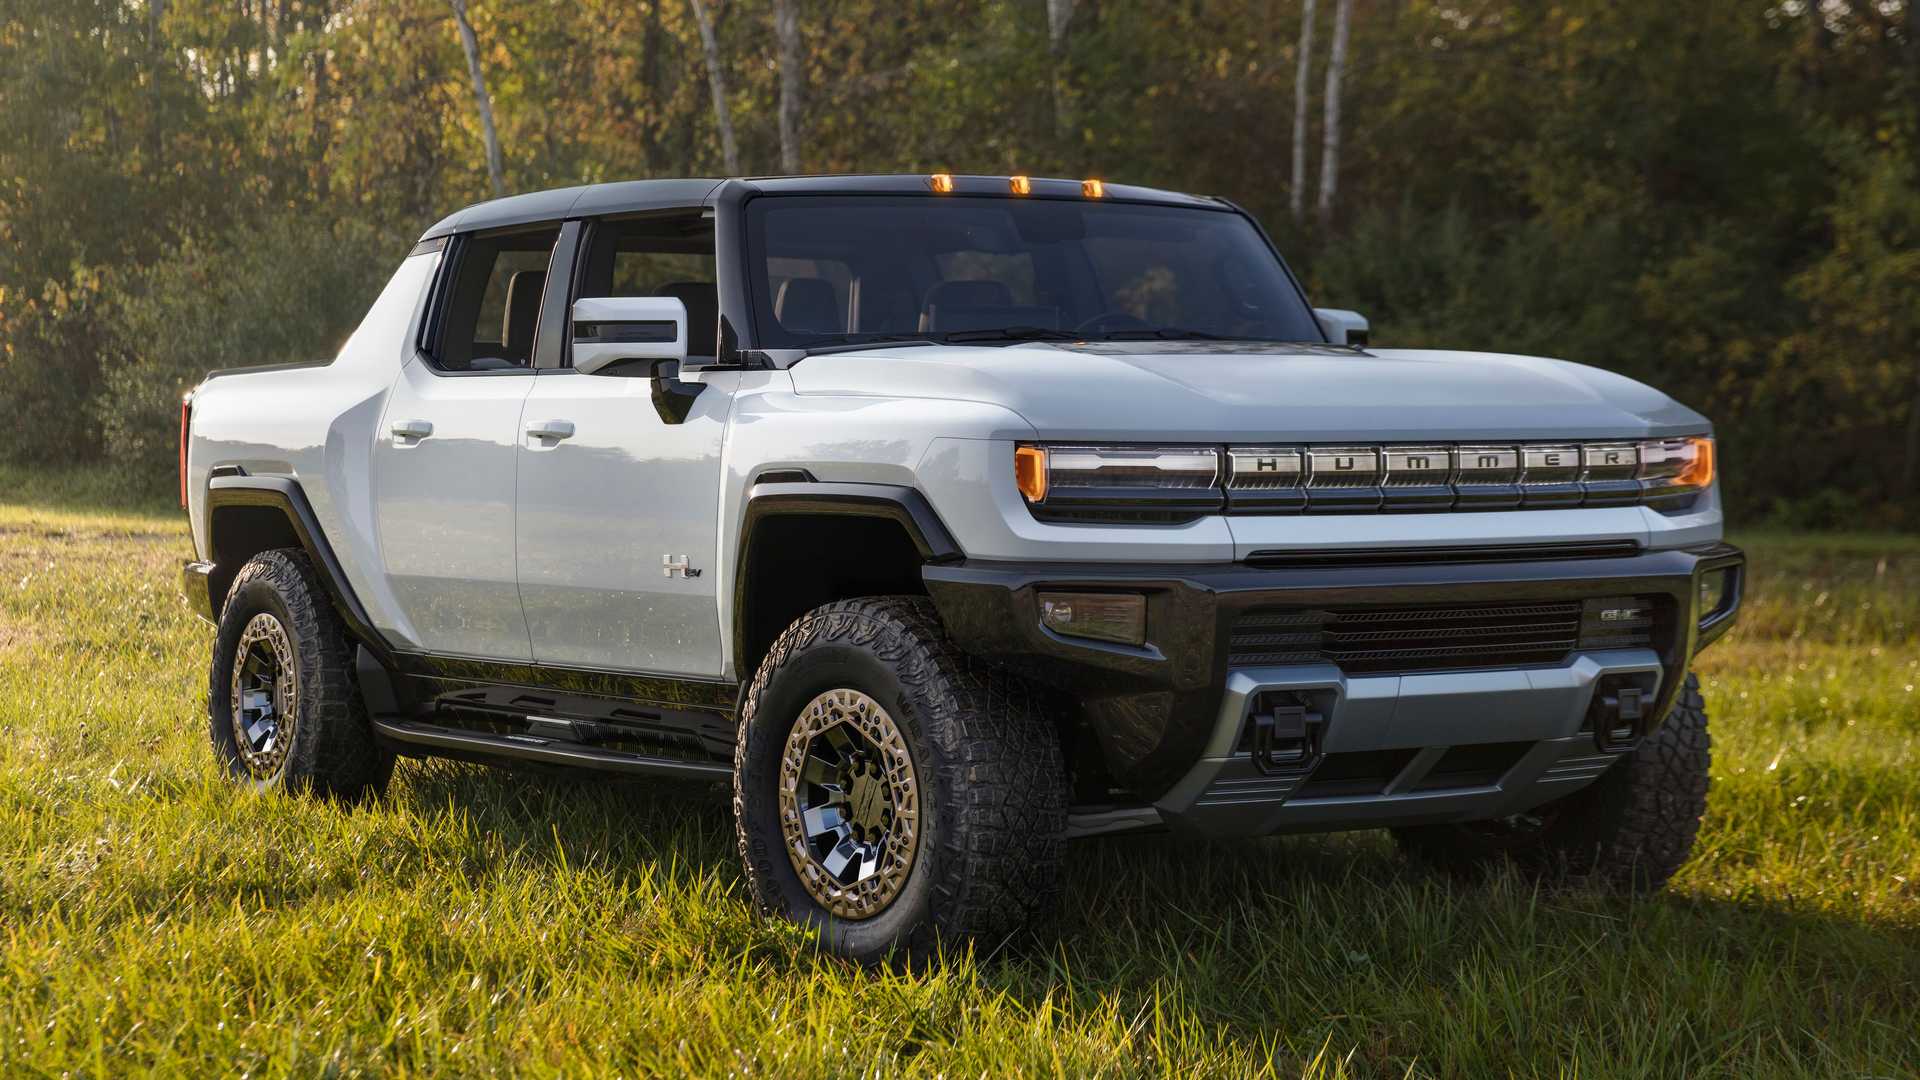 New 2022 GMC Hummer EV Price, Trims, Release Date, Range and Specs